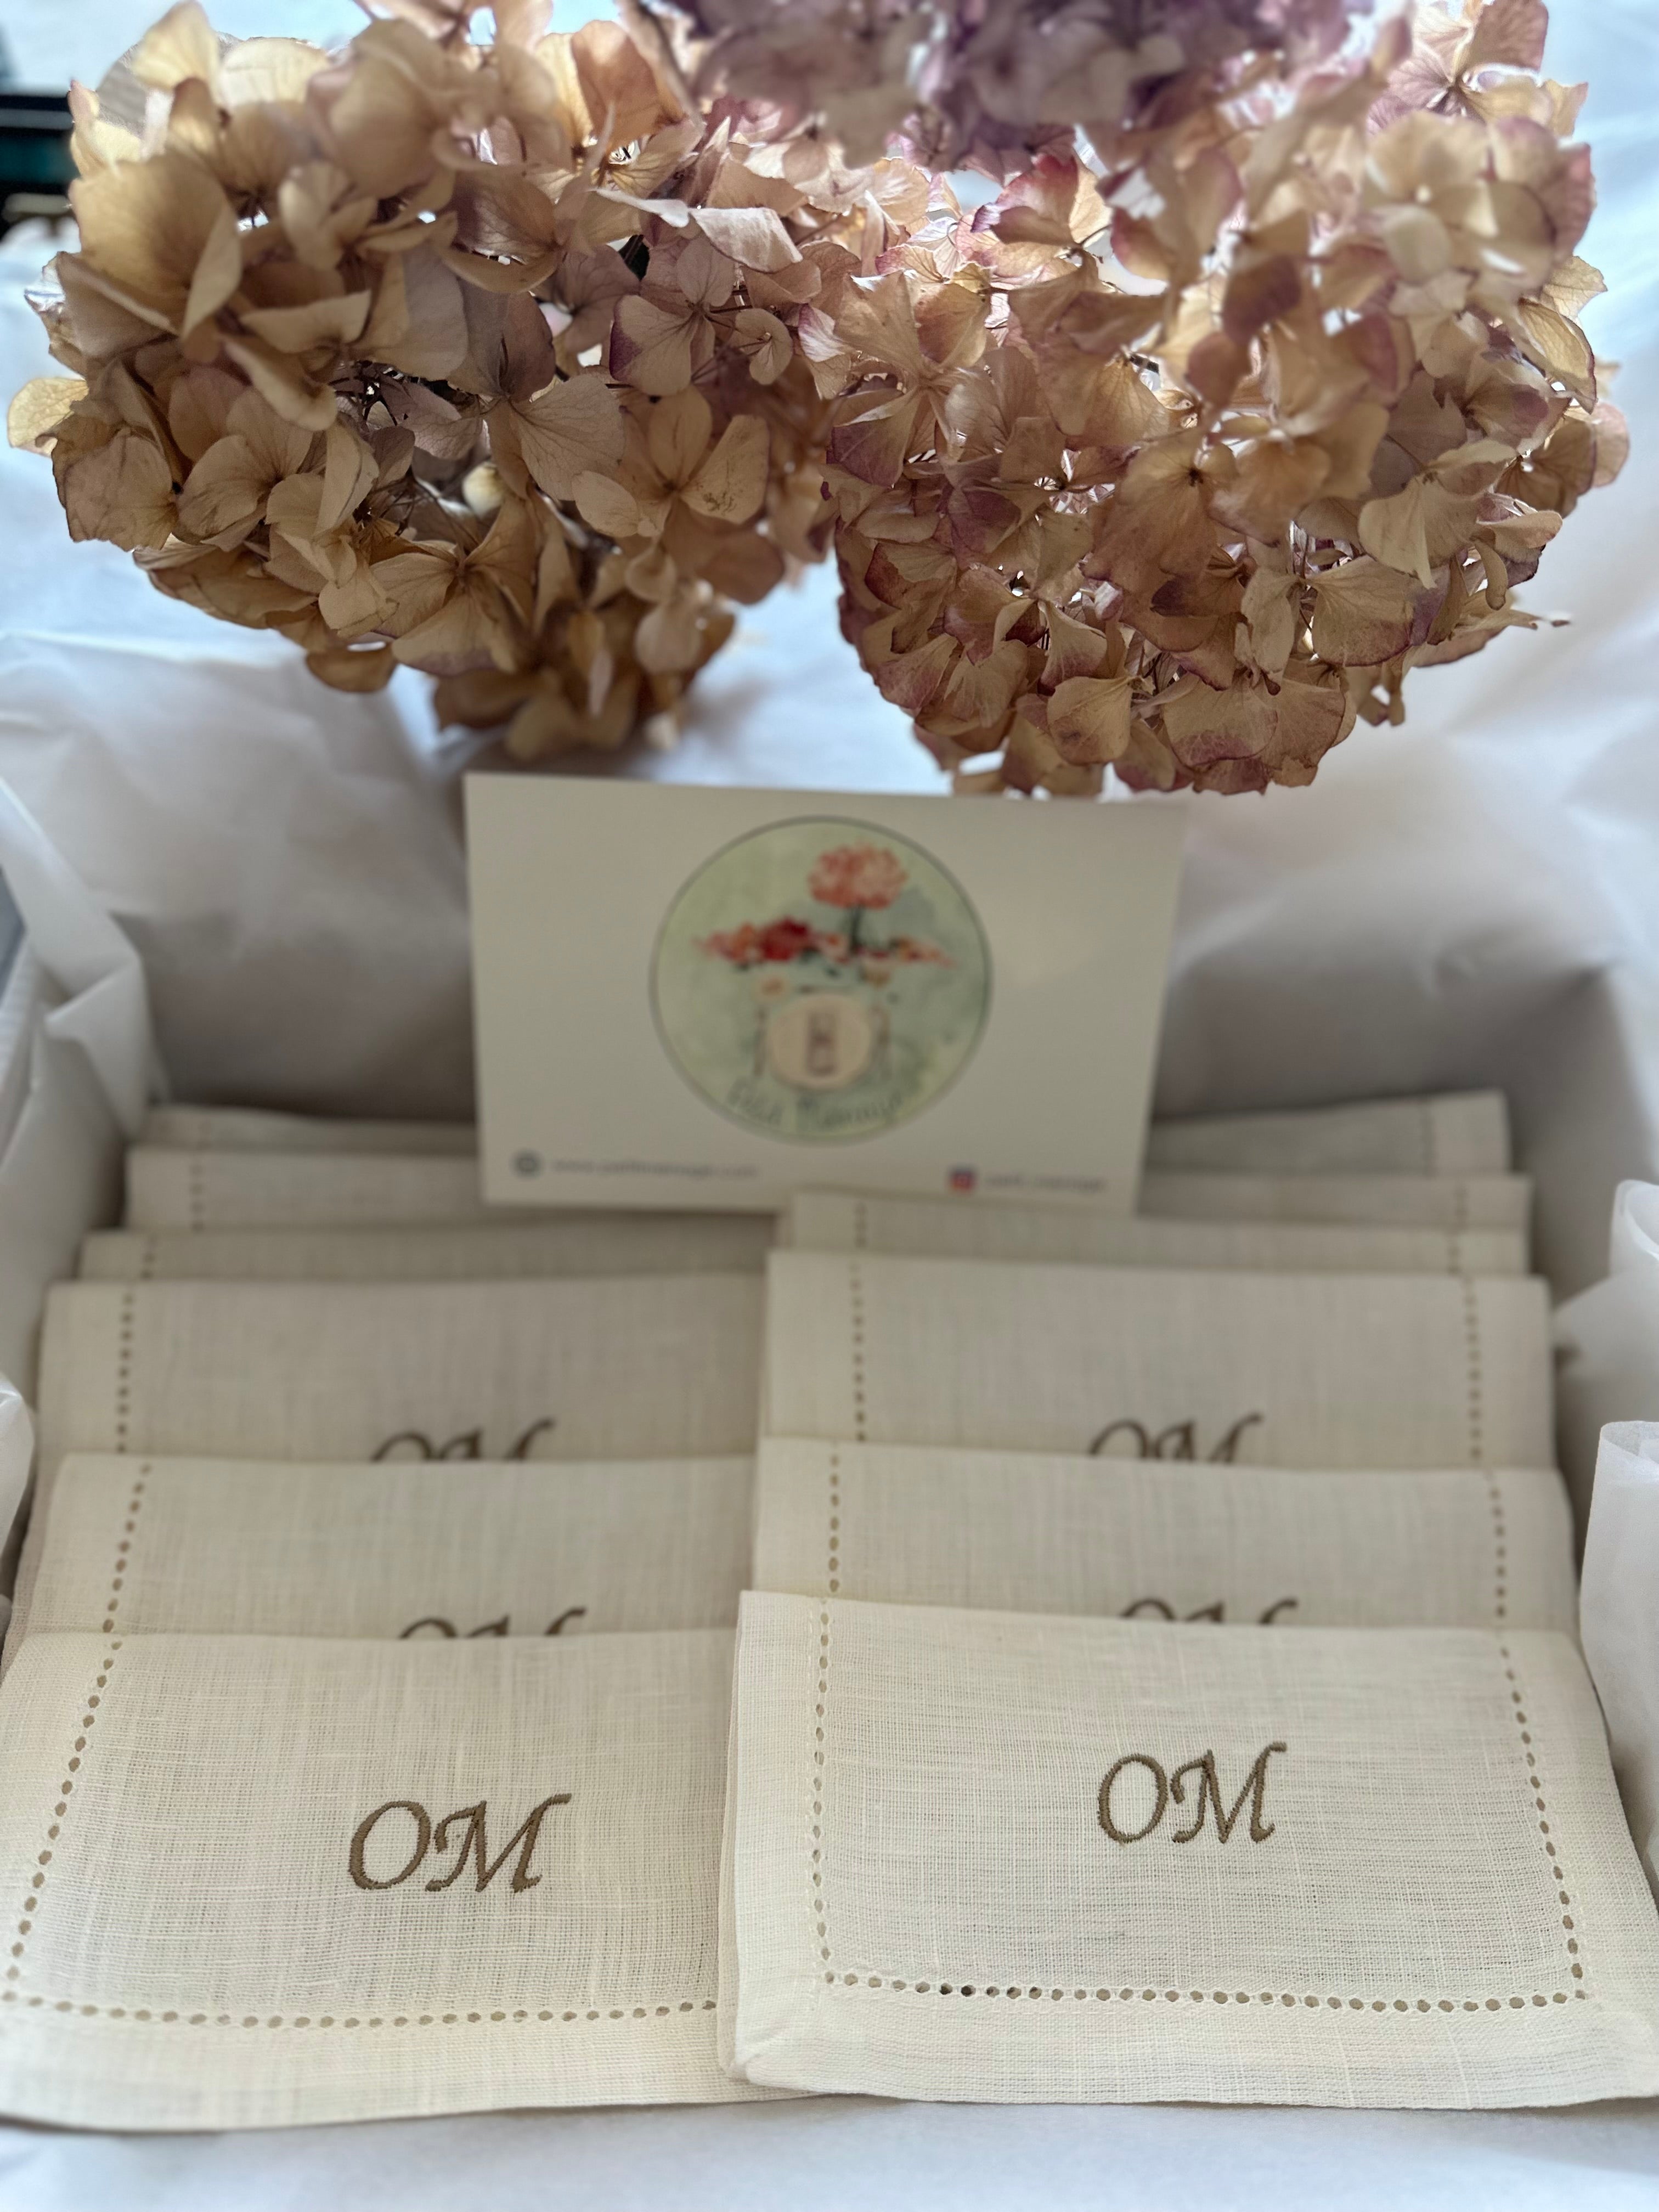 Personalized napkins for events